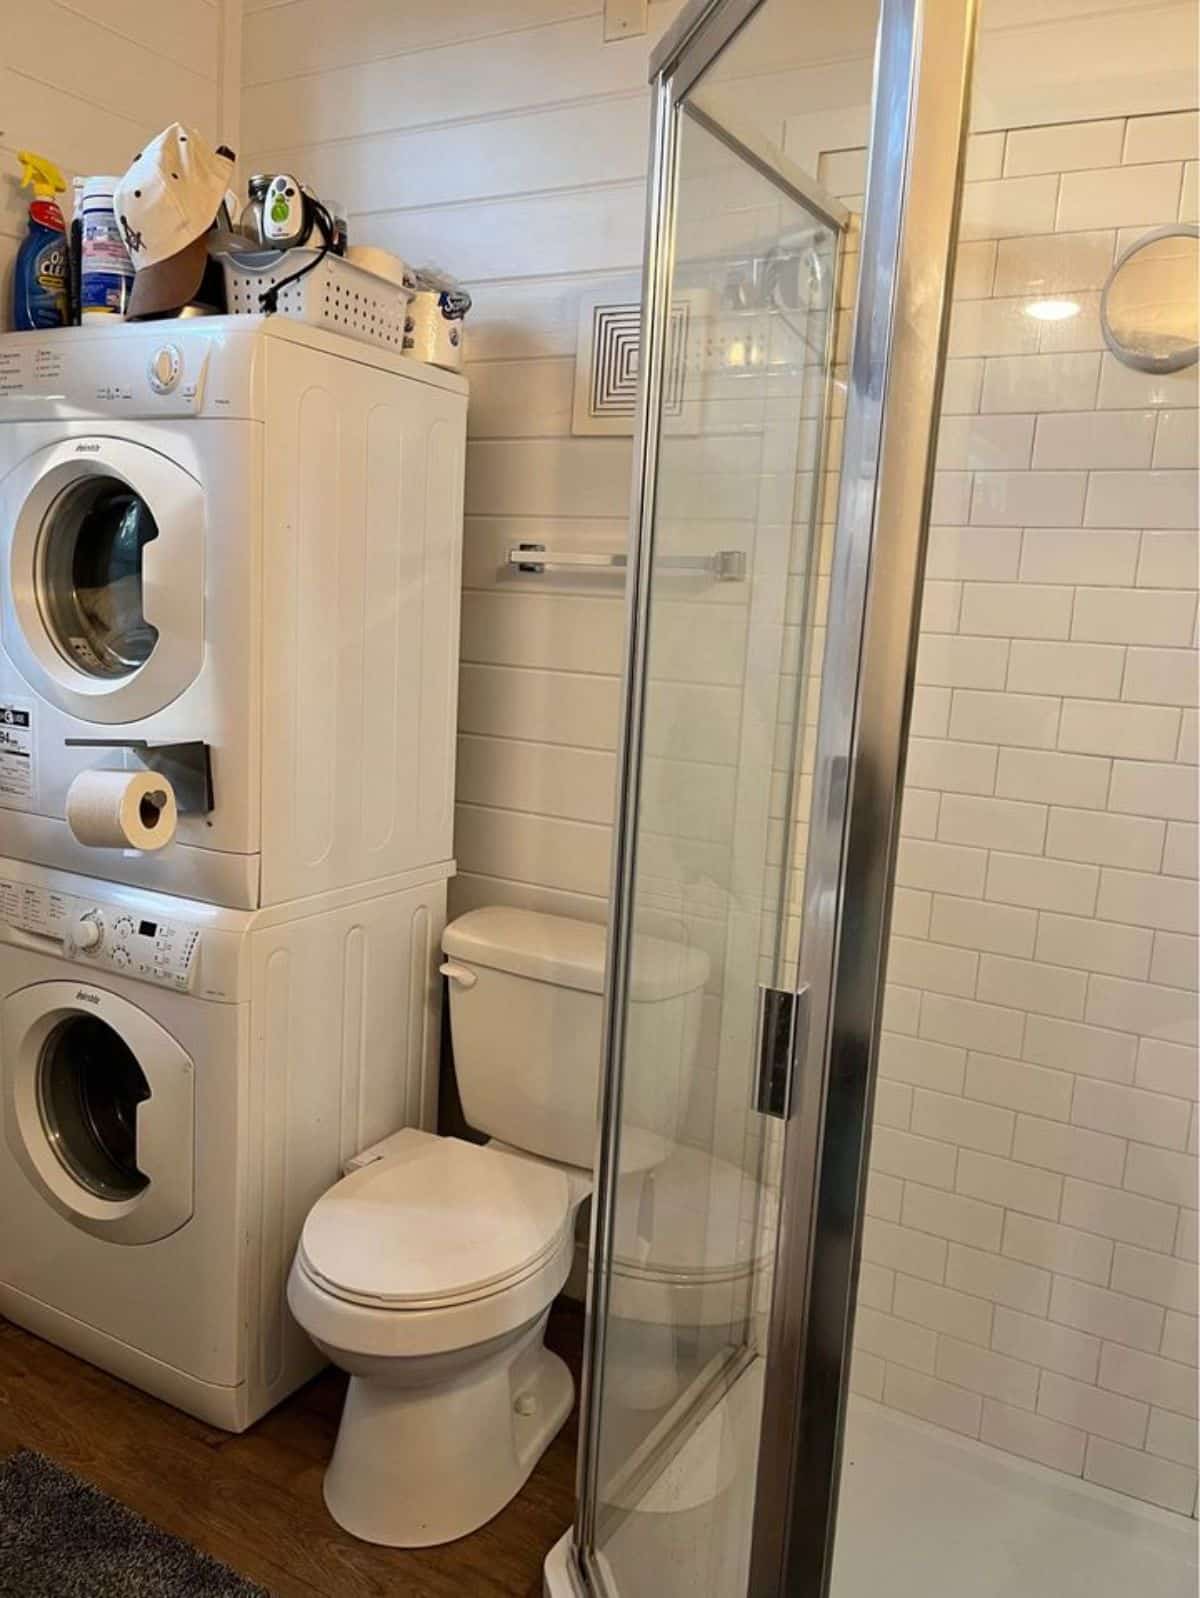 bathroom of 30’ tiny house has all the standard fittings